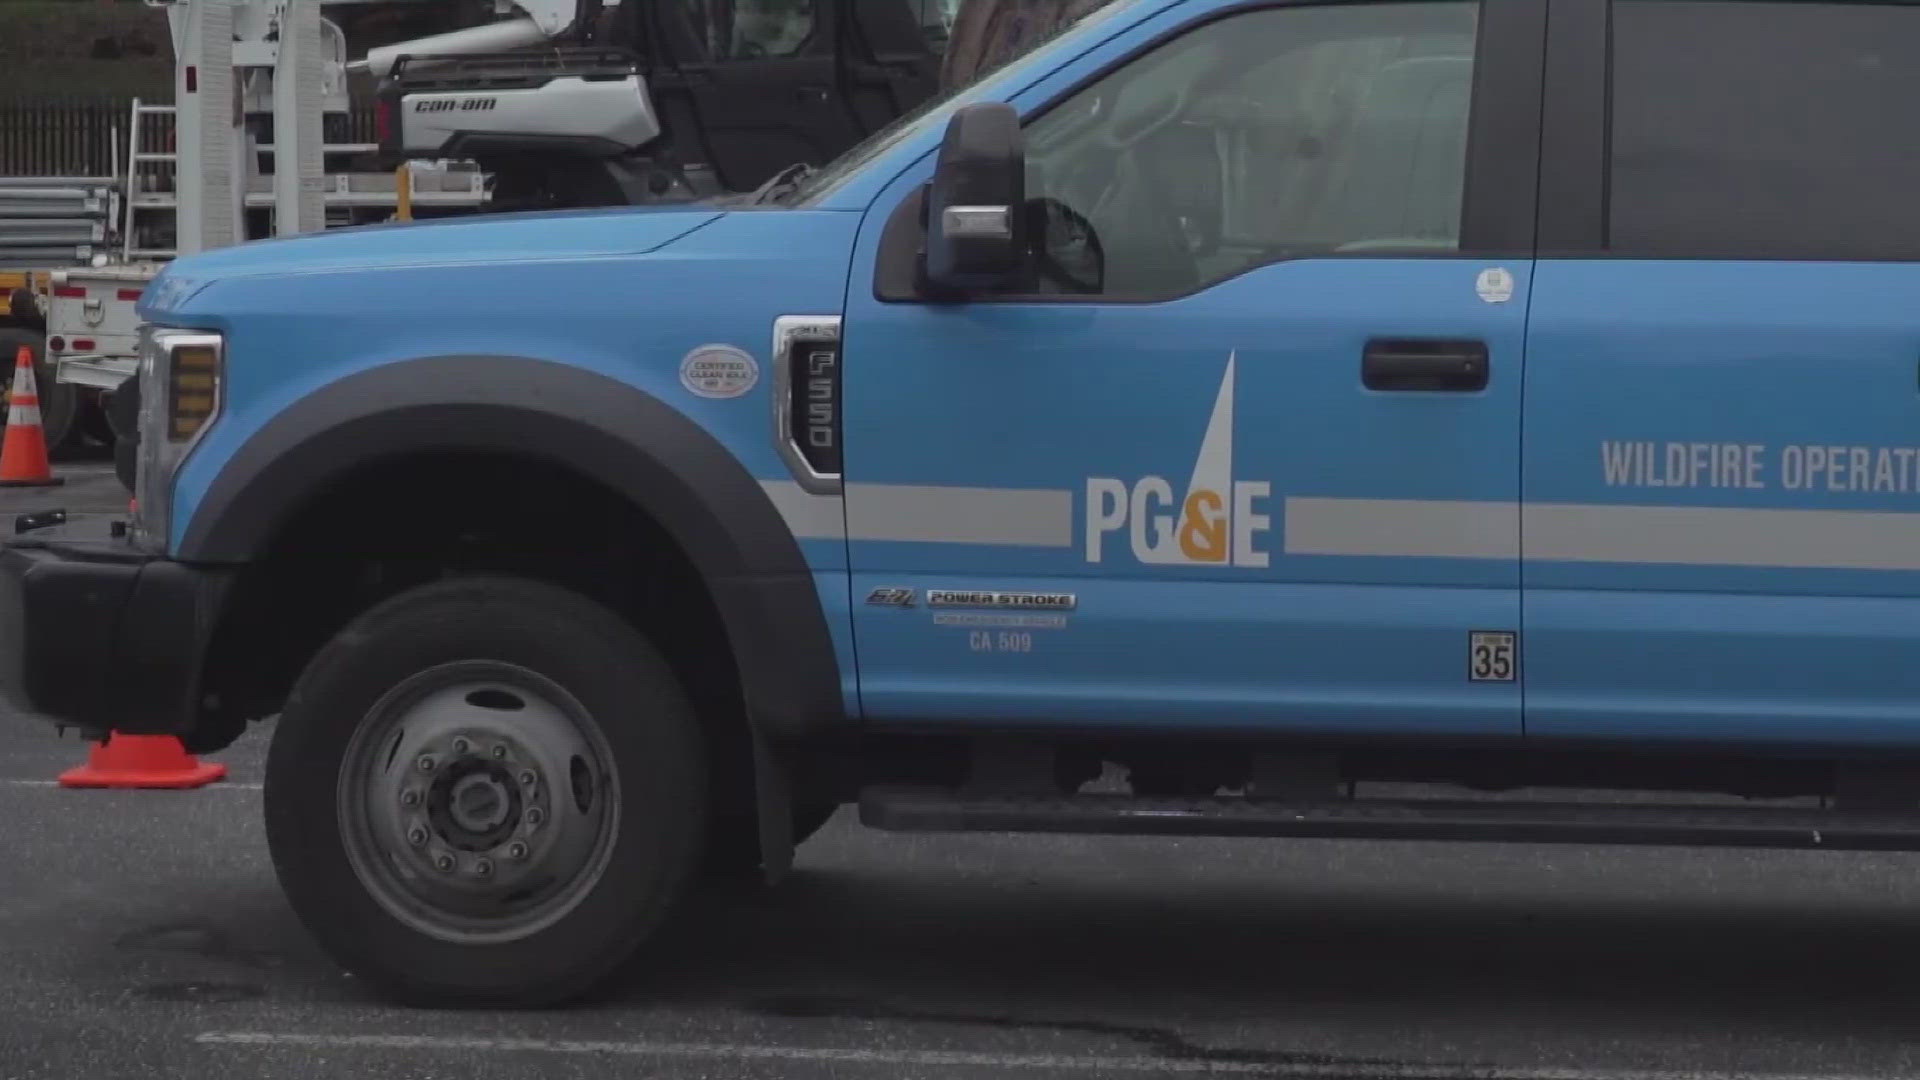 This rate decrease is expected to last for at least a few months, according to PG&E, but there's no exact timeline.